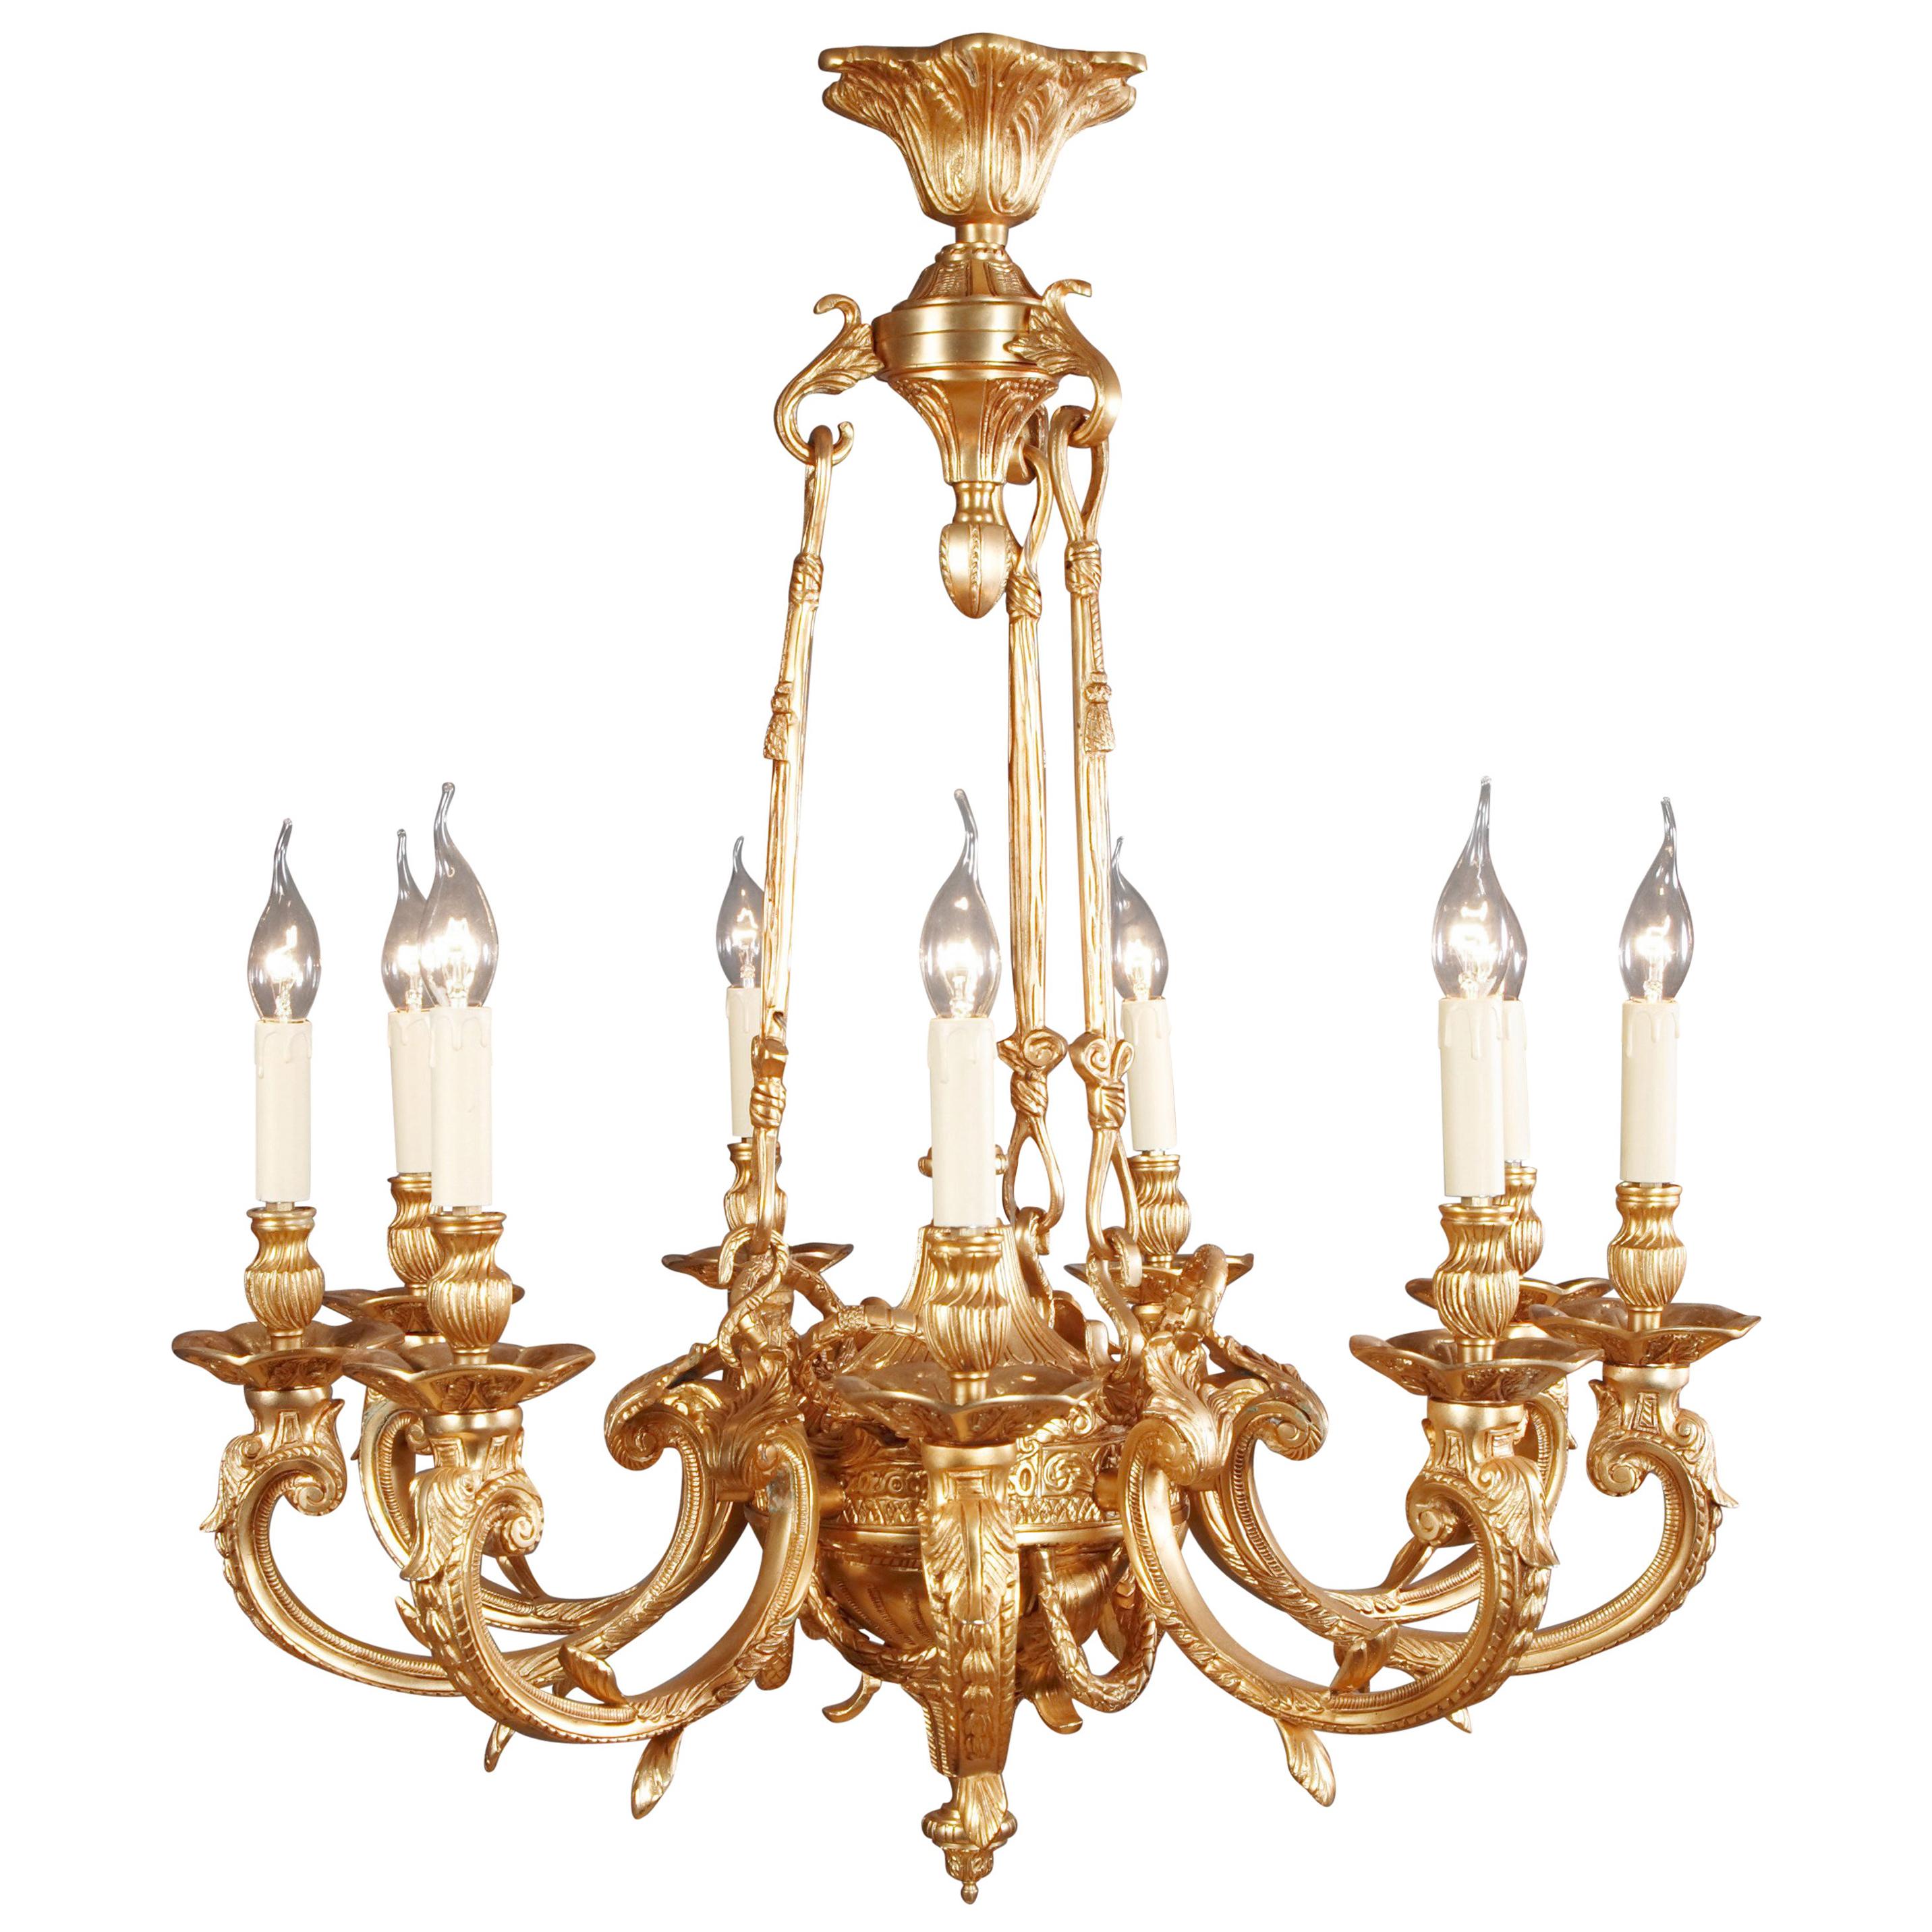 20th Century French Chandelier in Louis XIV Style